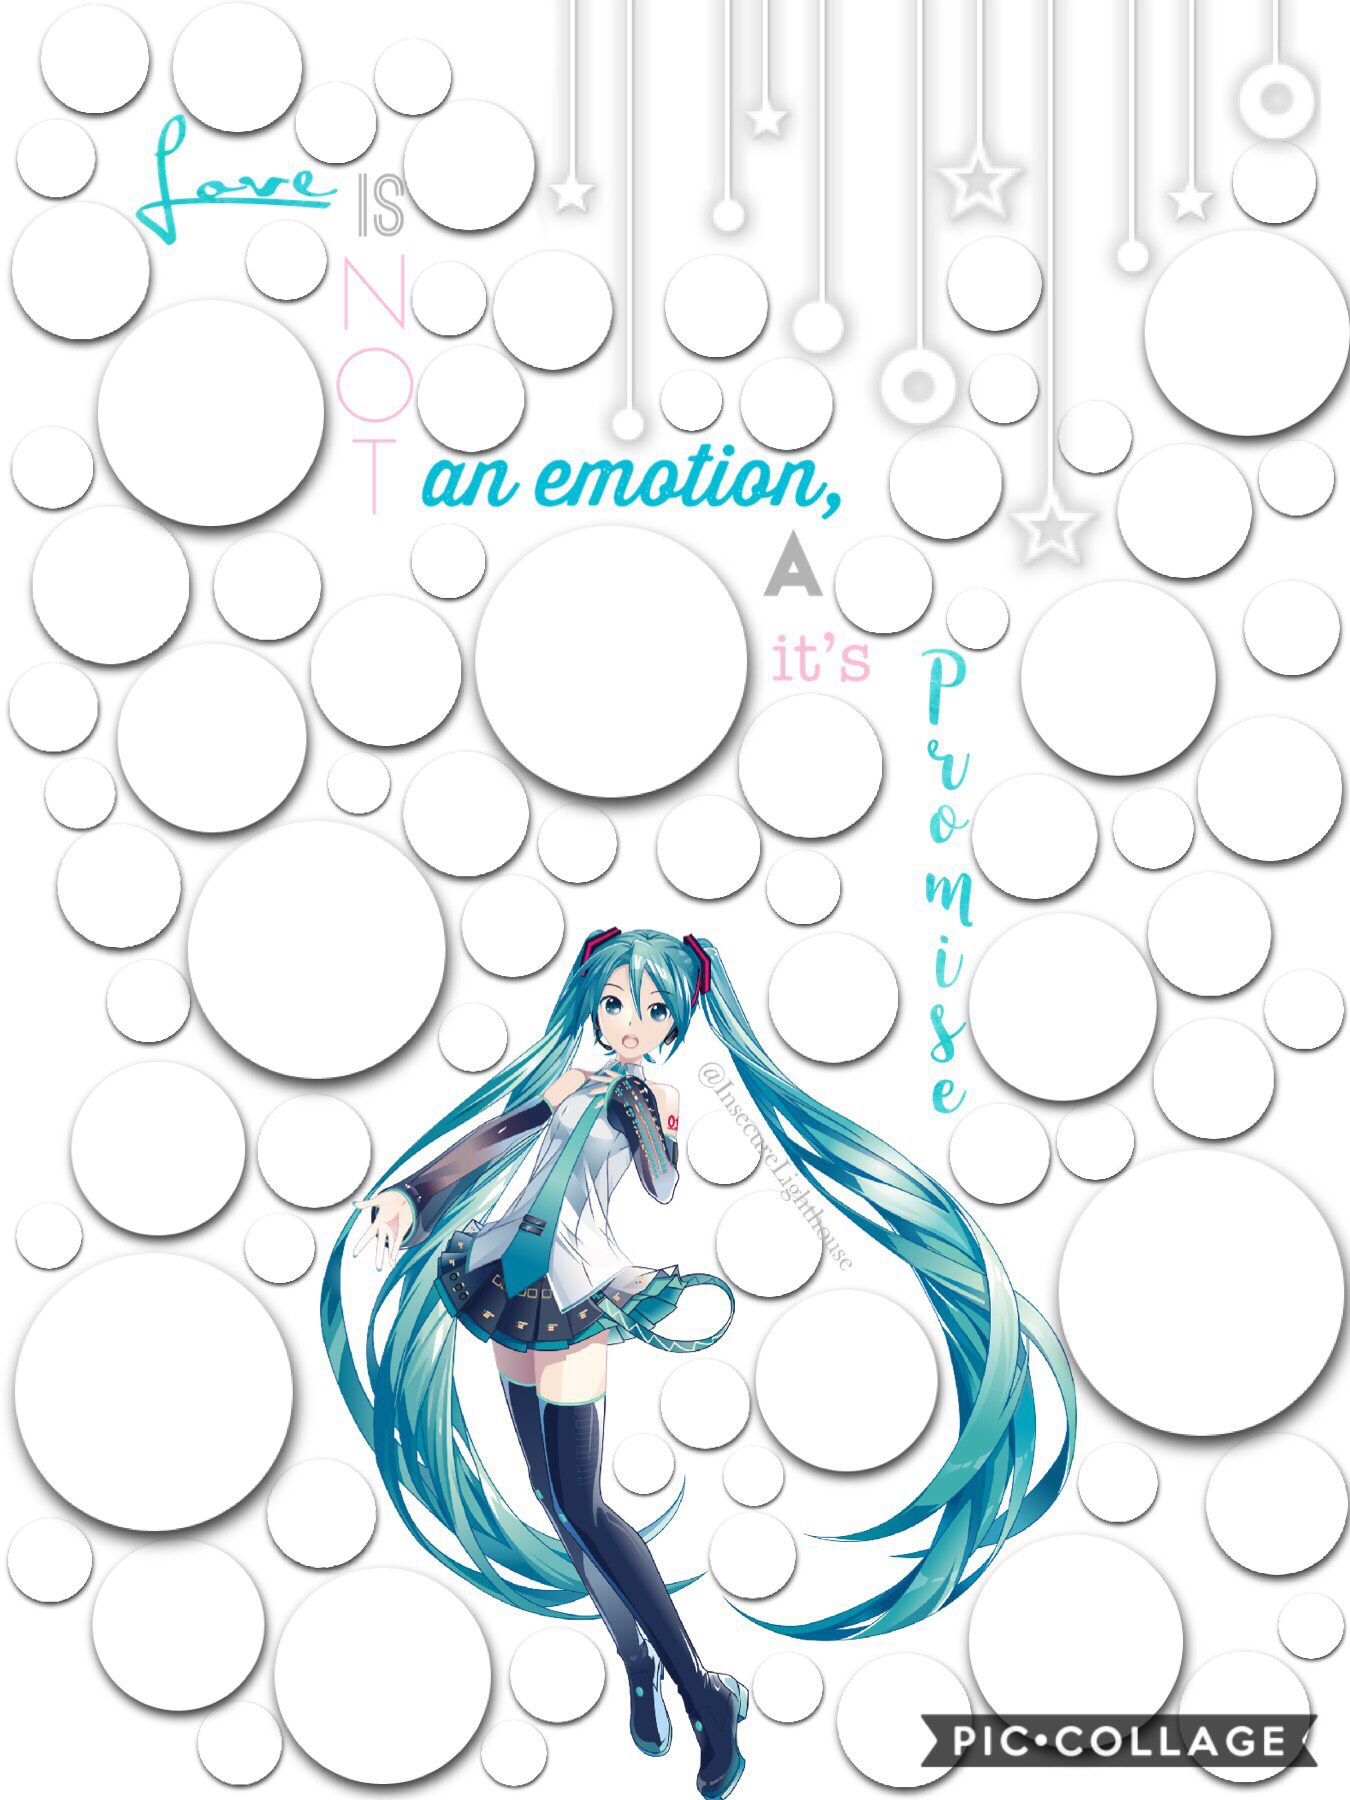 💙🖤Tap🖤💙
Hatsune Miku Edit!

Going for a Feature

Plz help me! I’ve never gotten a Feature before!
It would be amazing!!